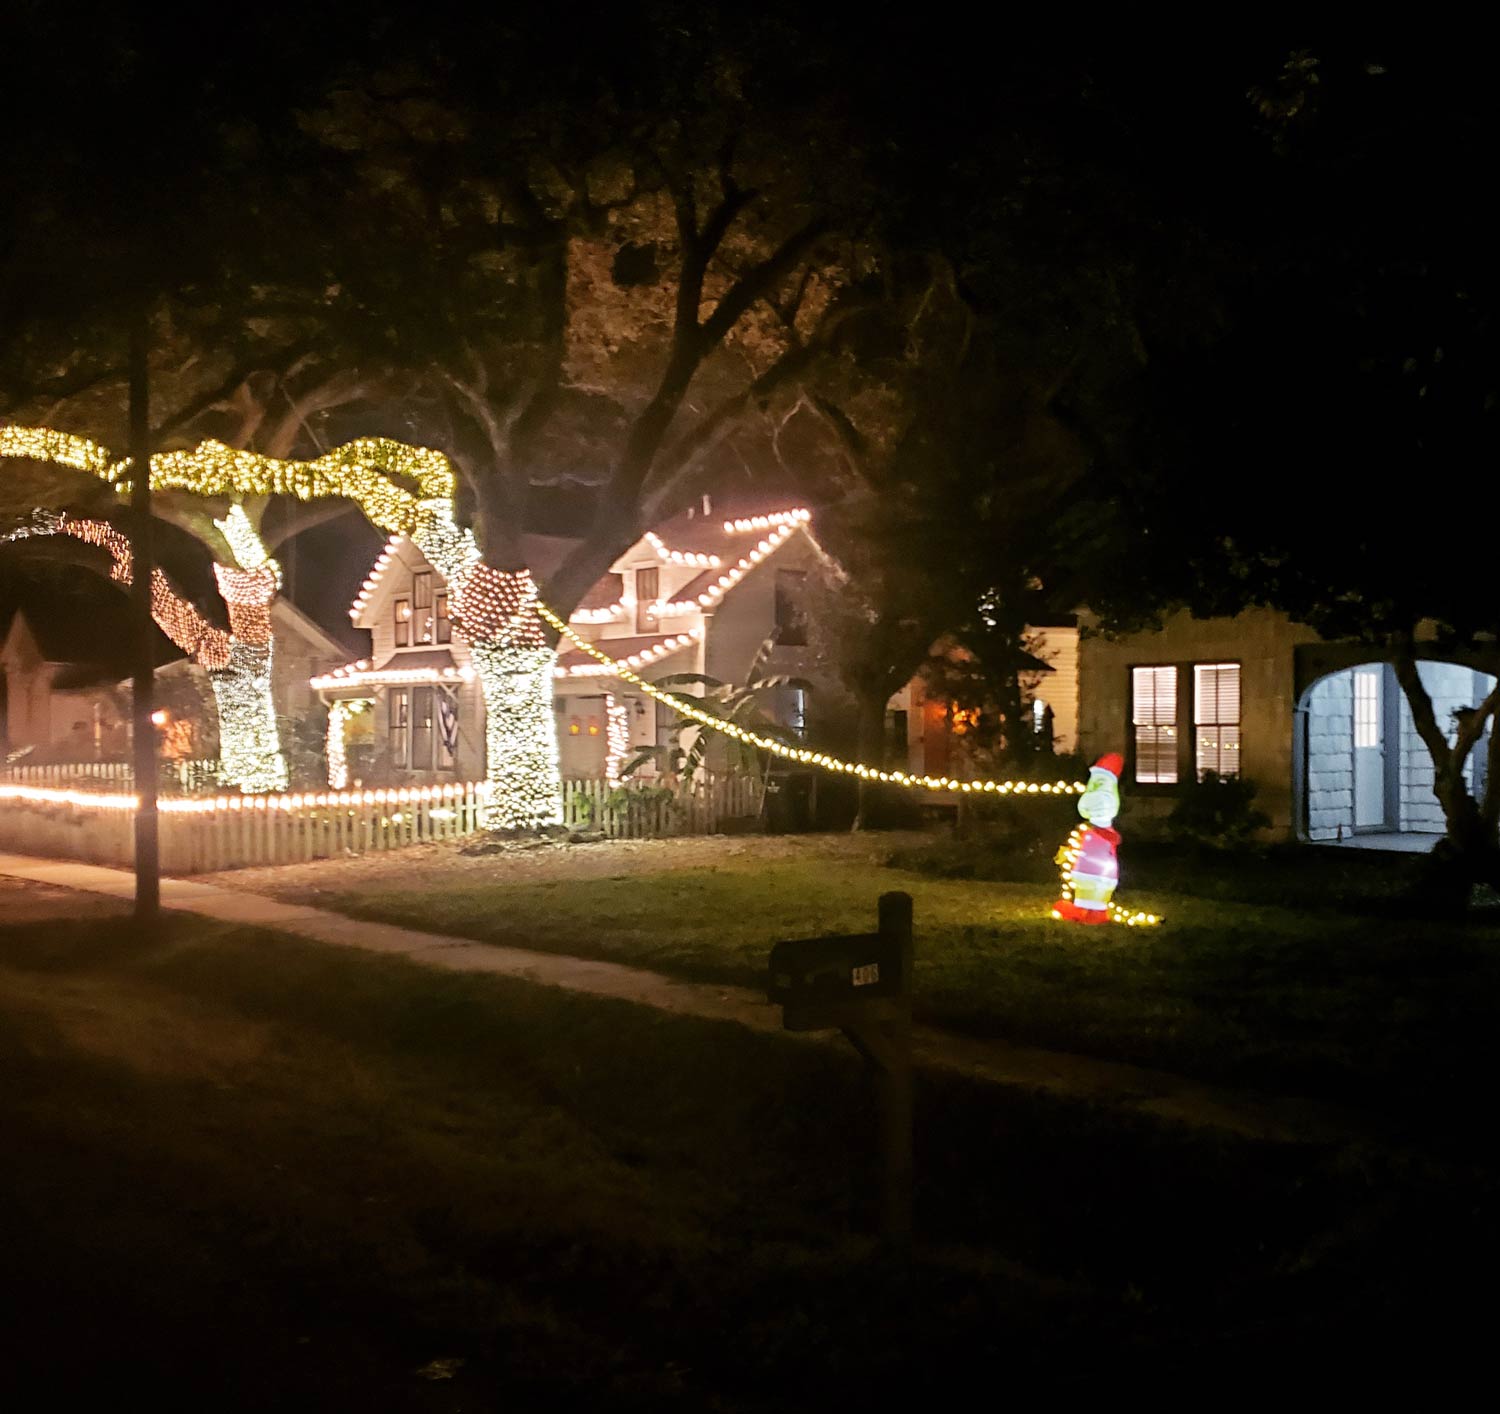 After I bought this house I was informed my neighbors do it big for Christmas. I spent a lot of money already buying a new tree and all the decorations for the inside, so I talked to my neighbor and we came up with the perfect solution. I promise I'm not really a grinch!